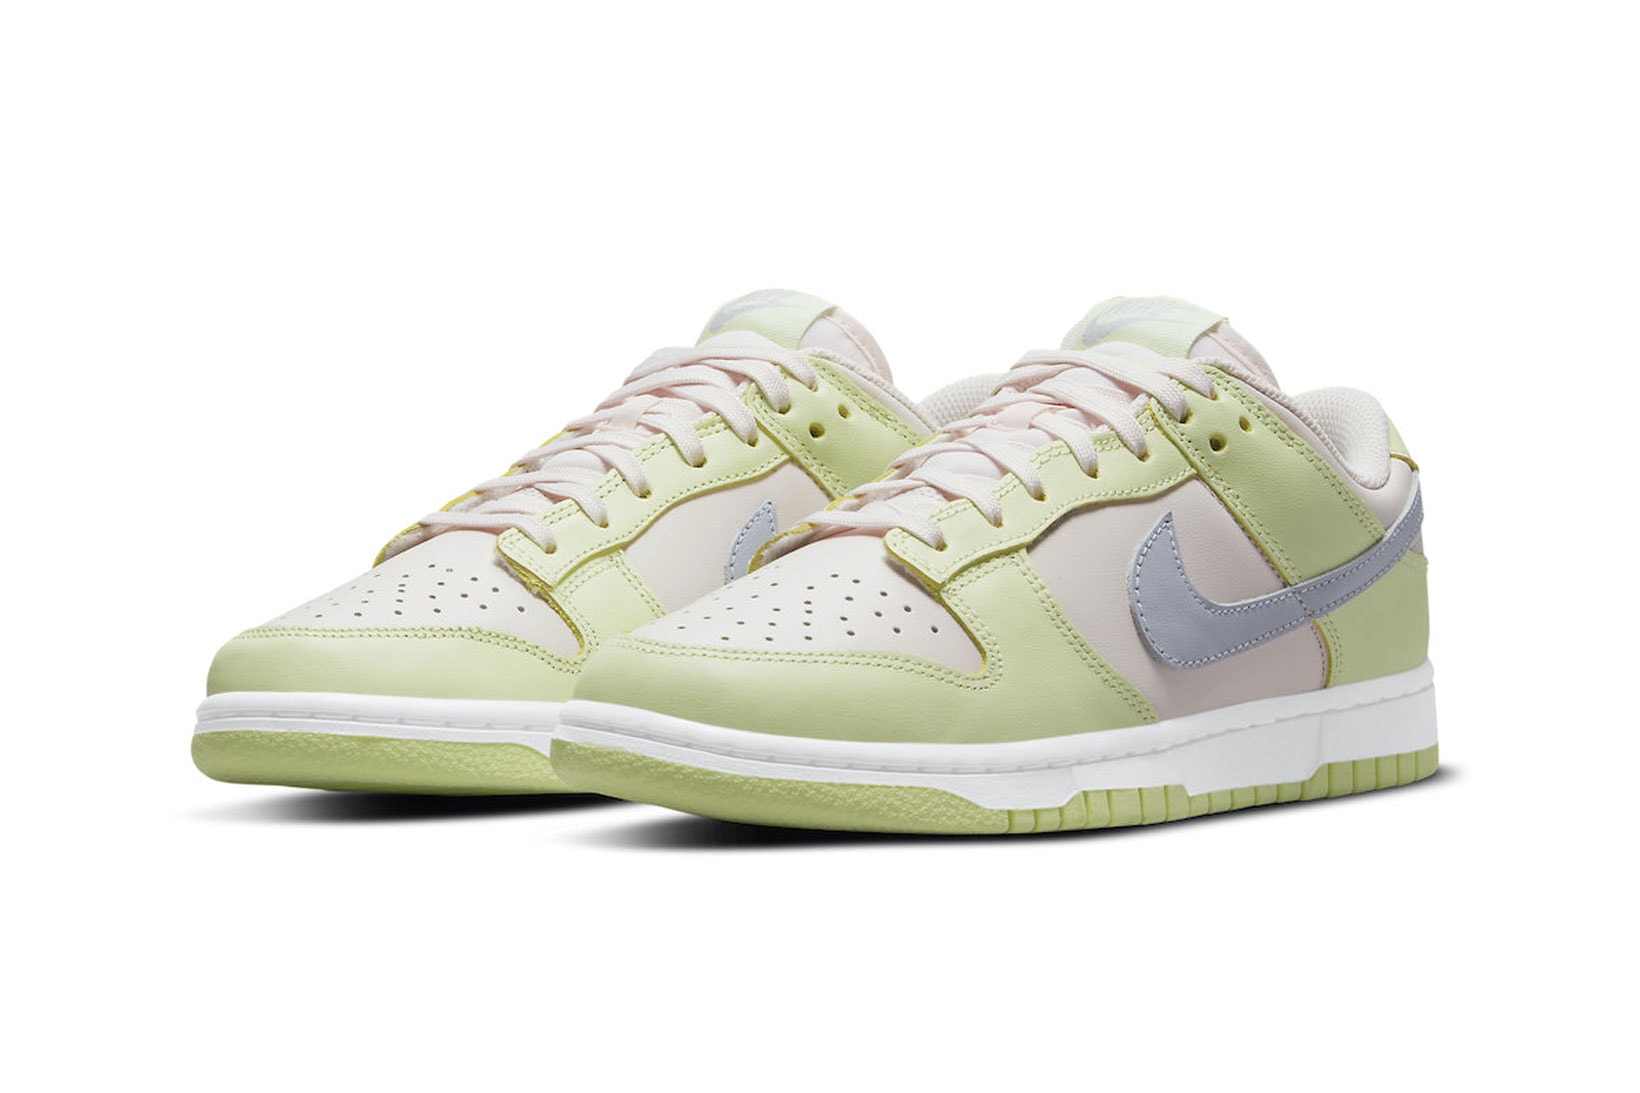 nike dunk low lime ice womens sneakers soft pink green upper swoosh details toe box